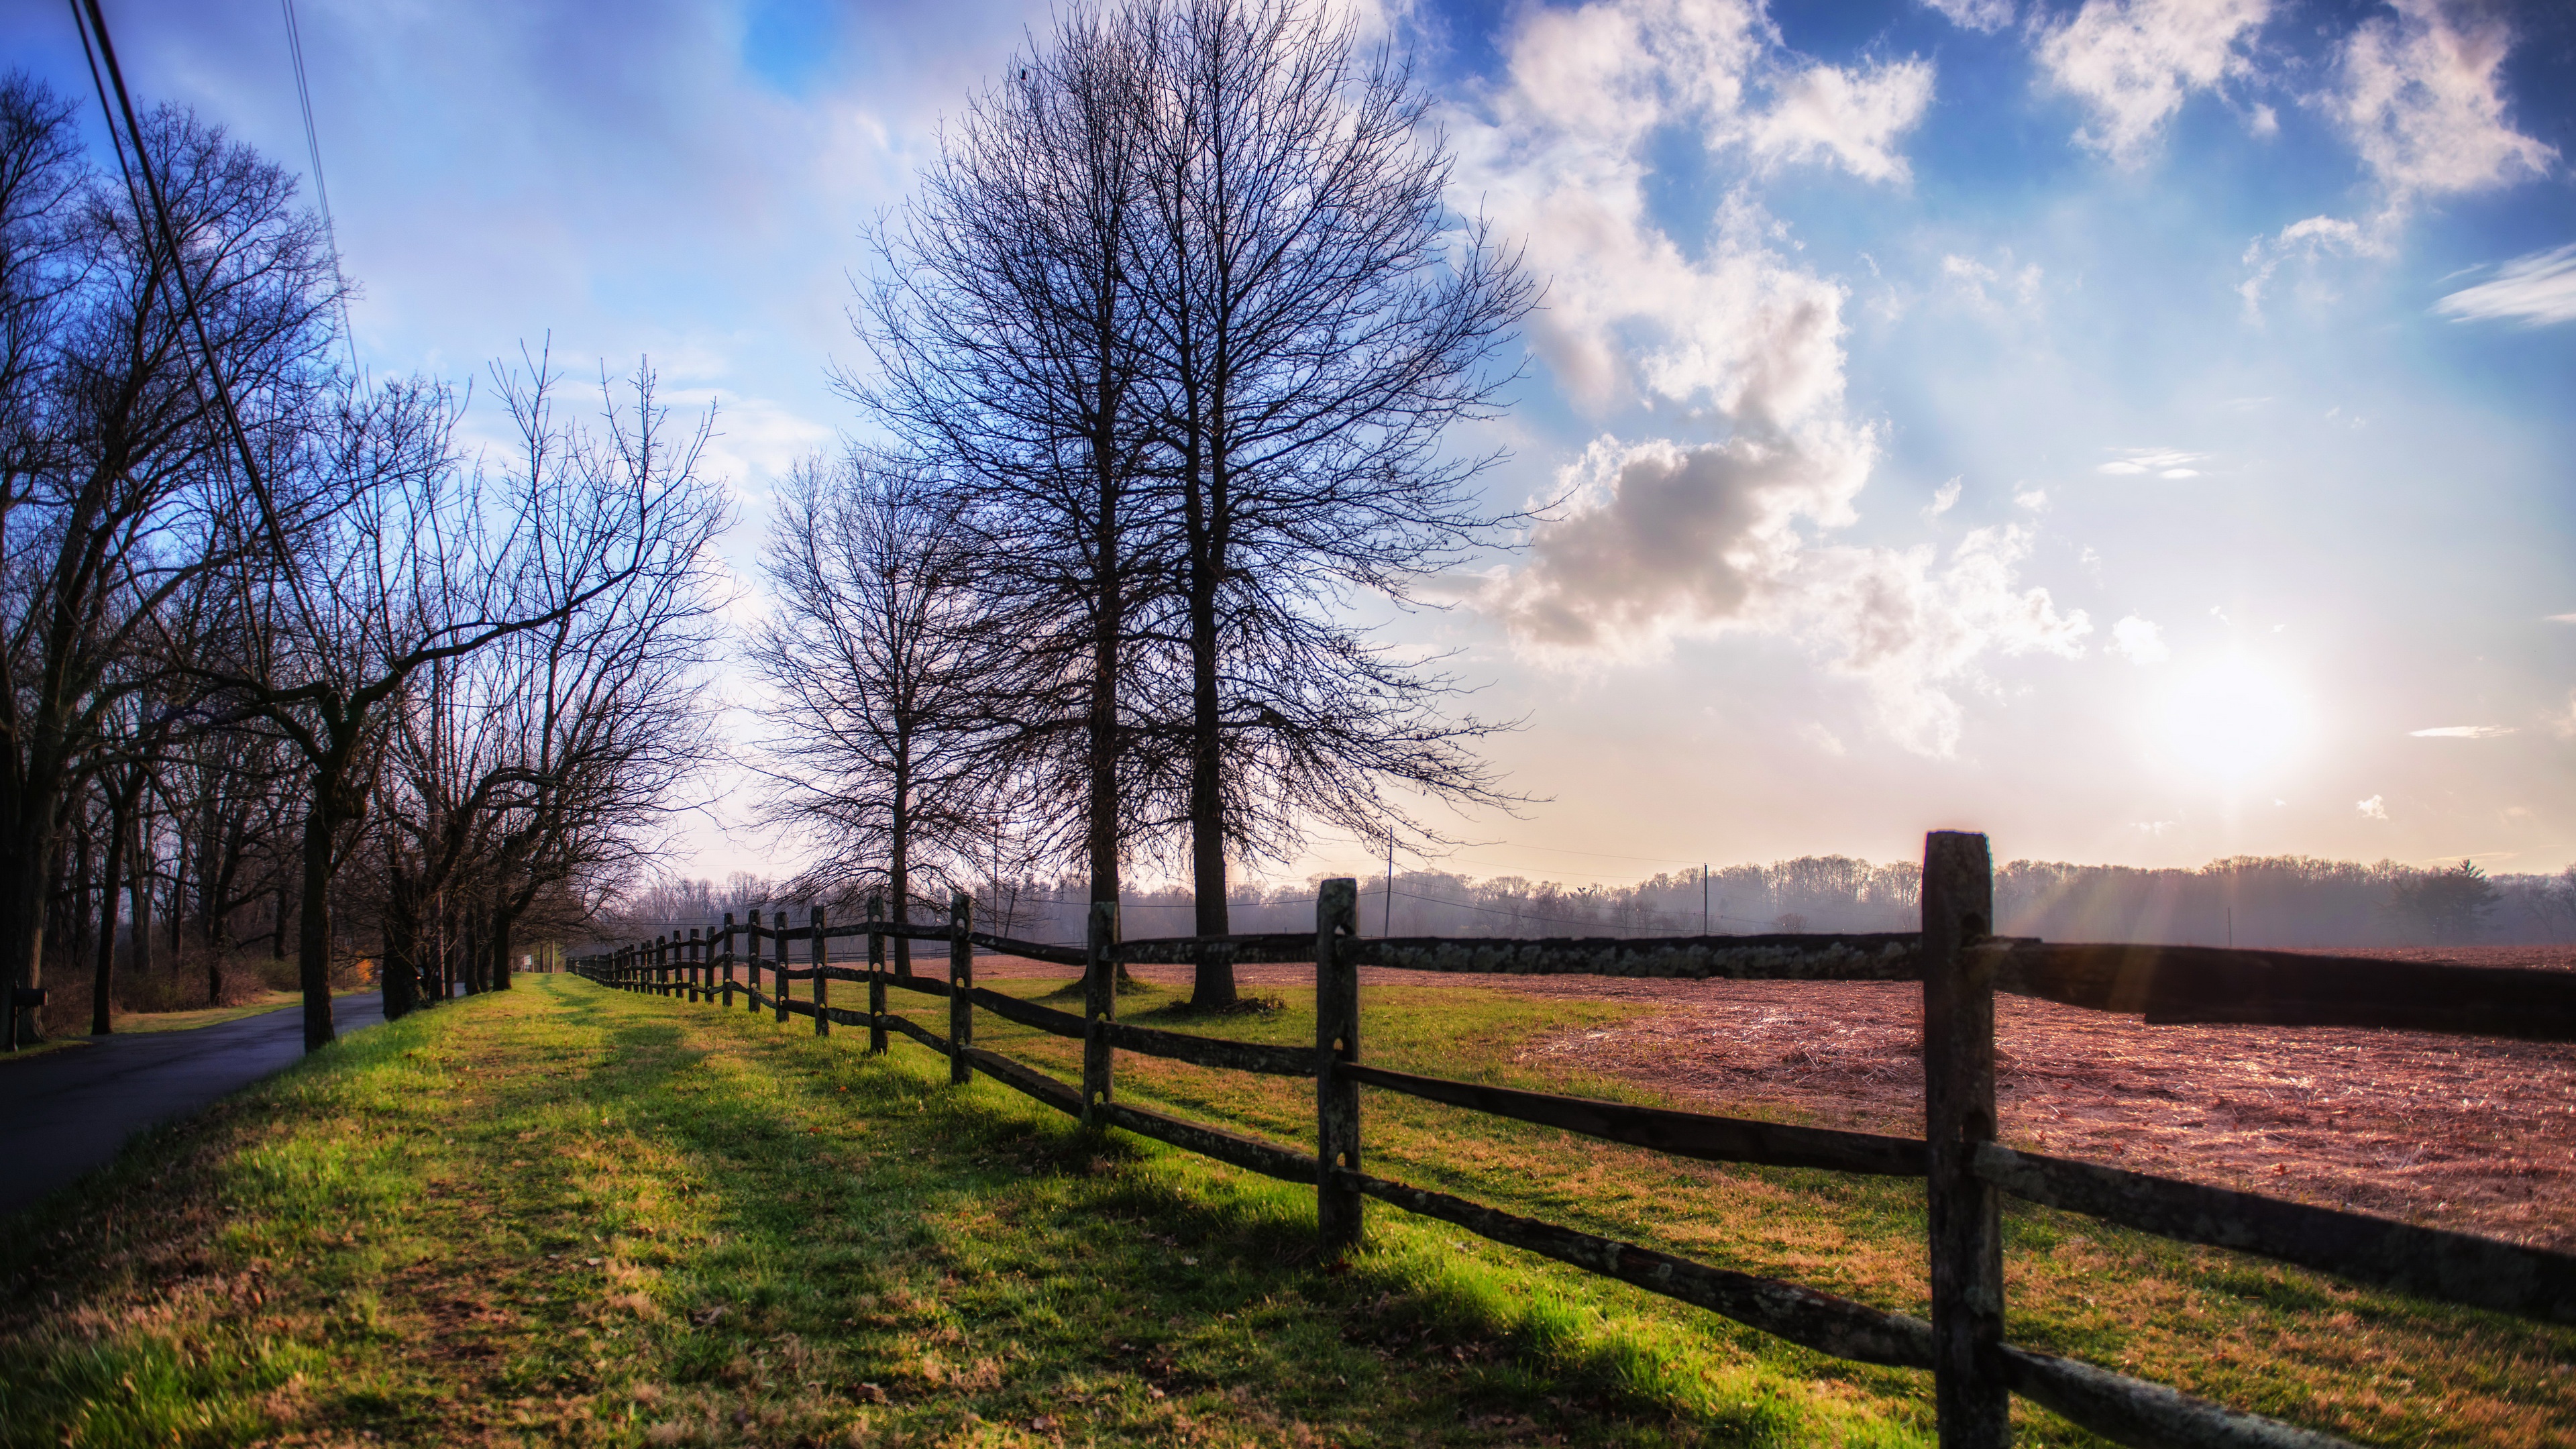 Outdoors Field Fence Trees Clouds Landscape Fall 3840x2160